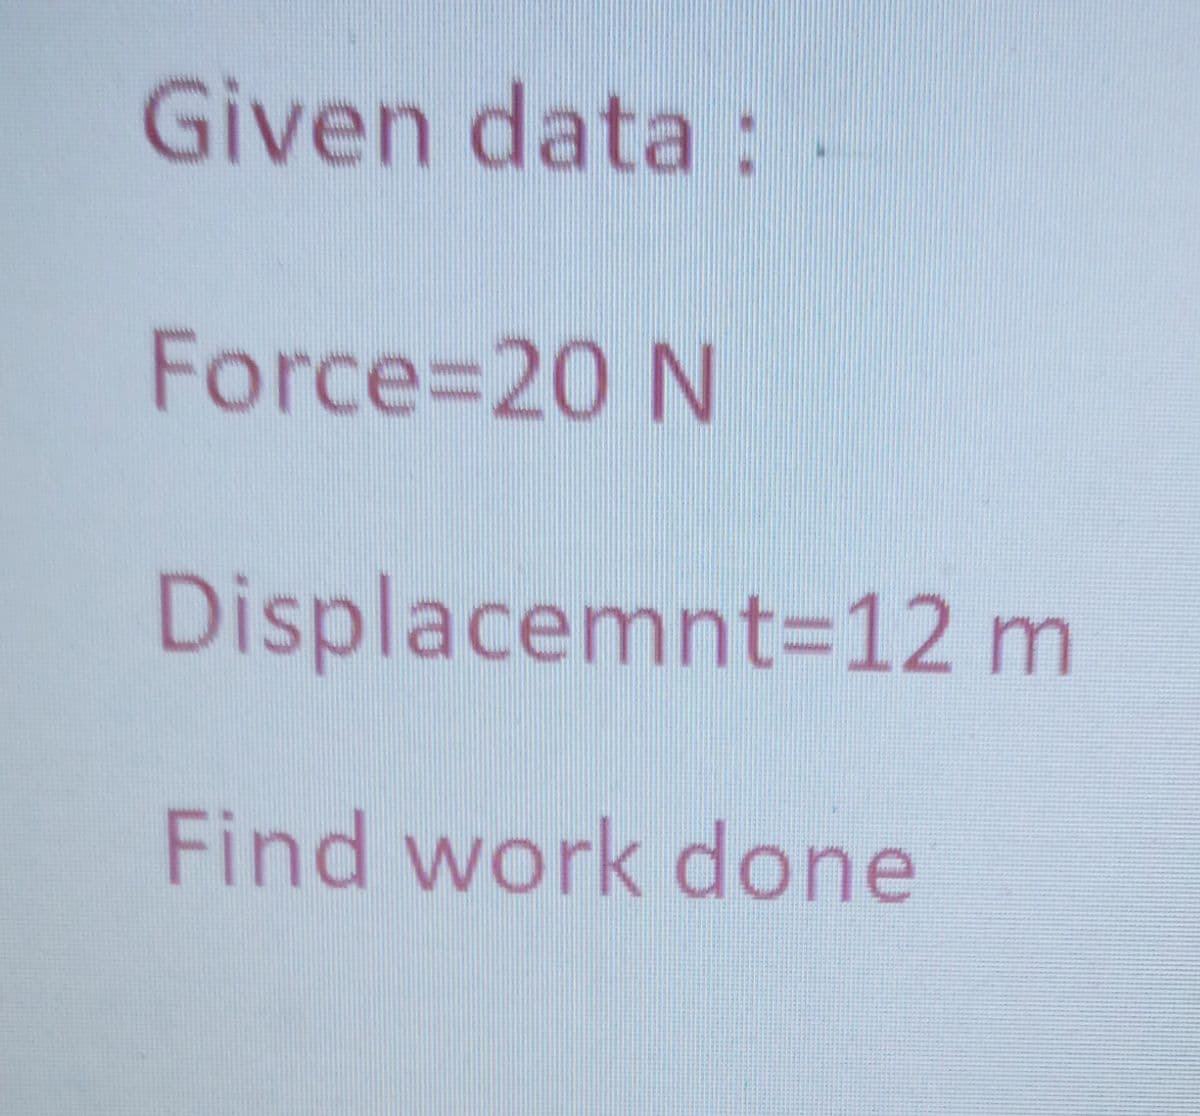 Given data :.
Force%320 N
Displacemnt=12 m
Find work done
